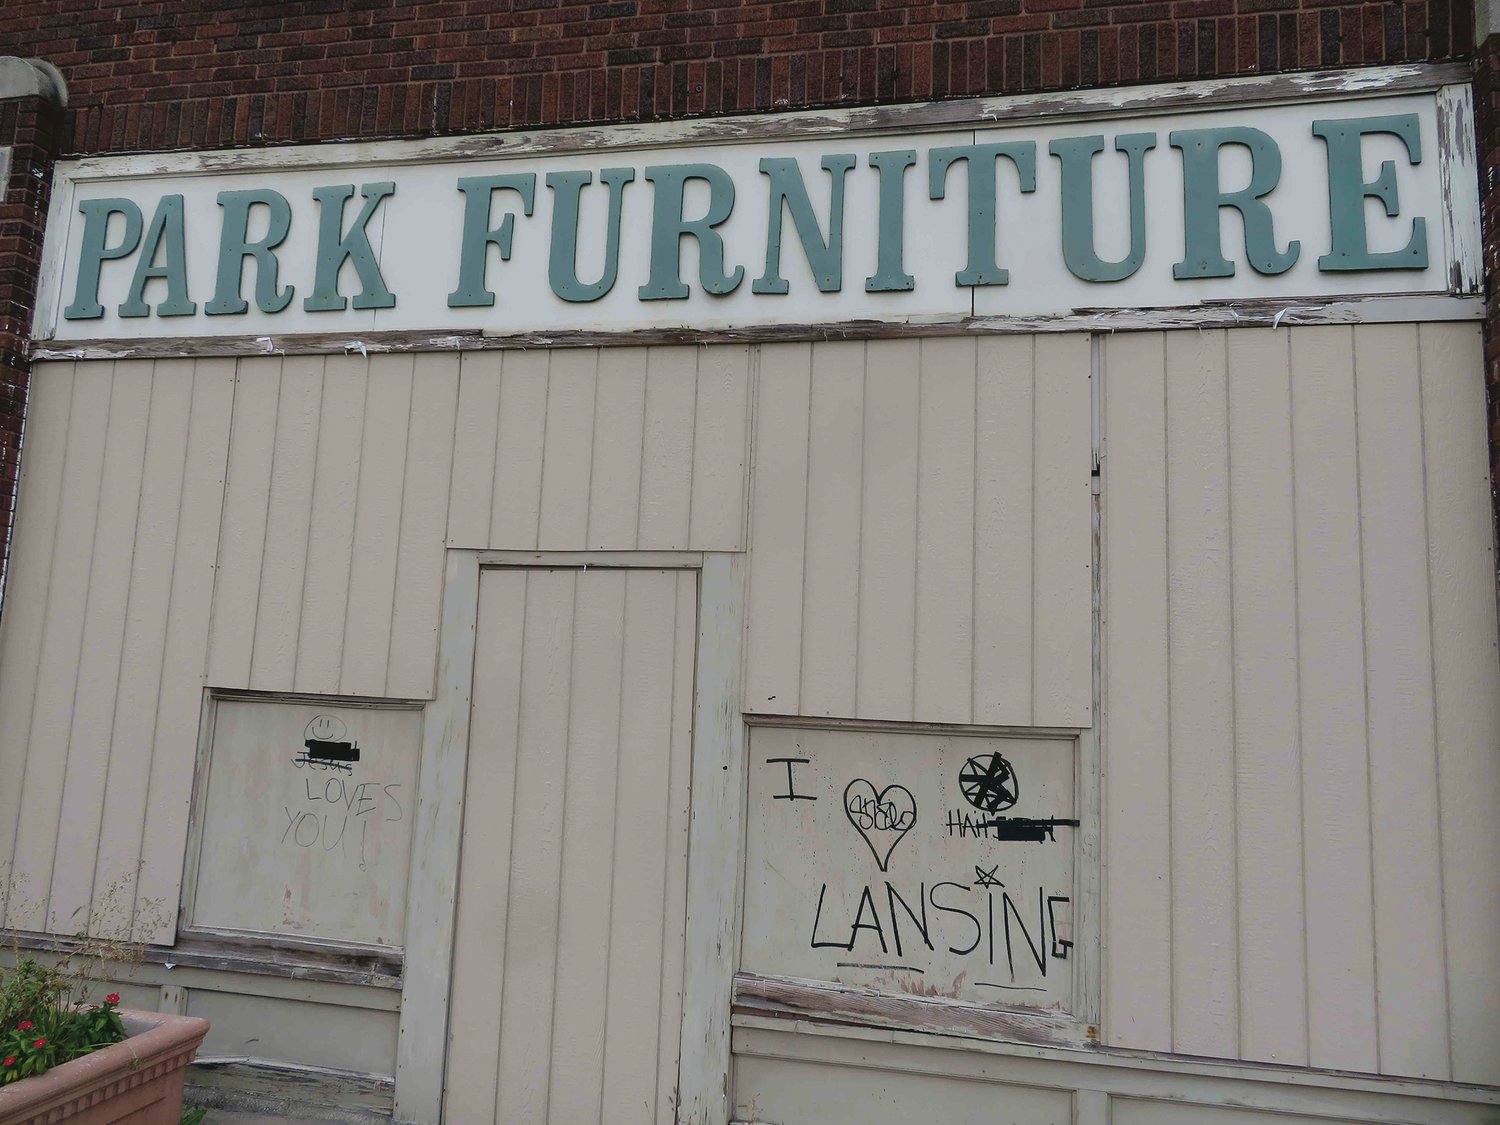 The former Park’s Furniture dominating the north side of the 900 block sold last week to Re’Shane Lonzo, Lansing-based owner of a job training center specializing in health care.